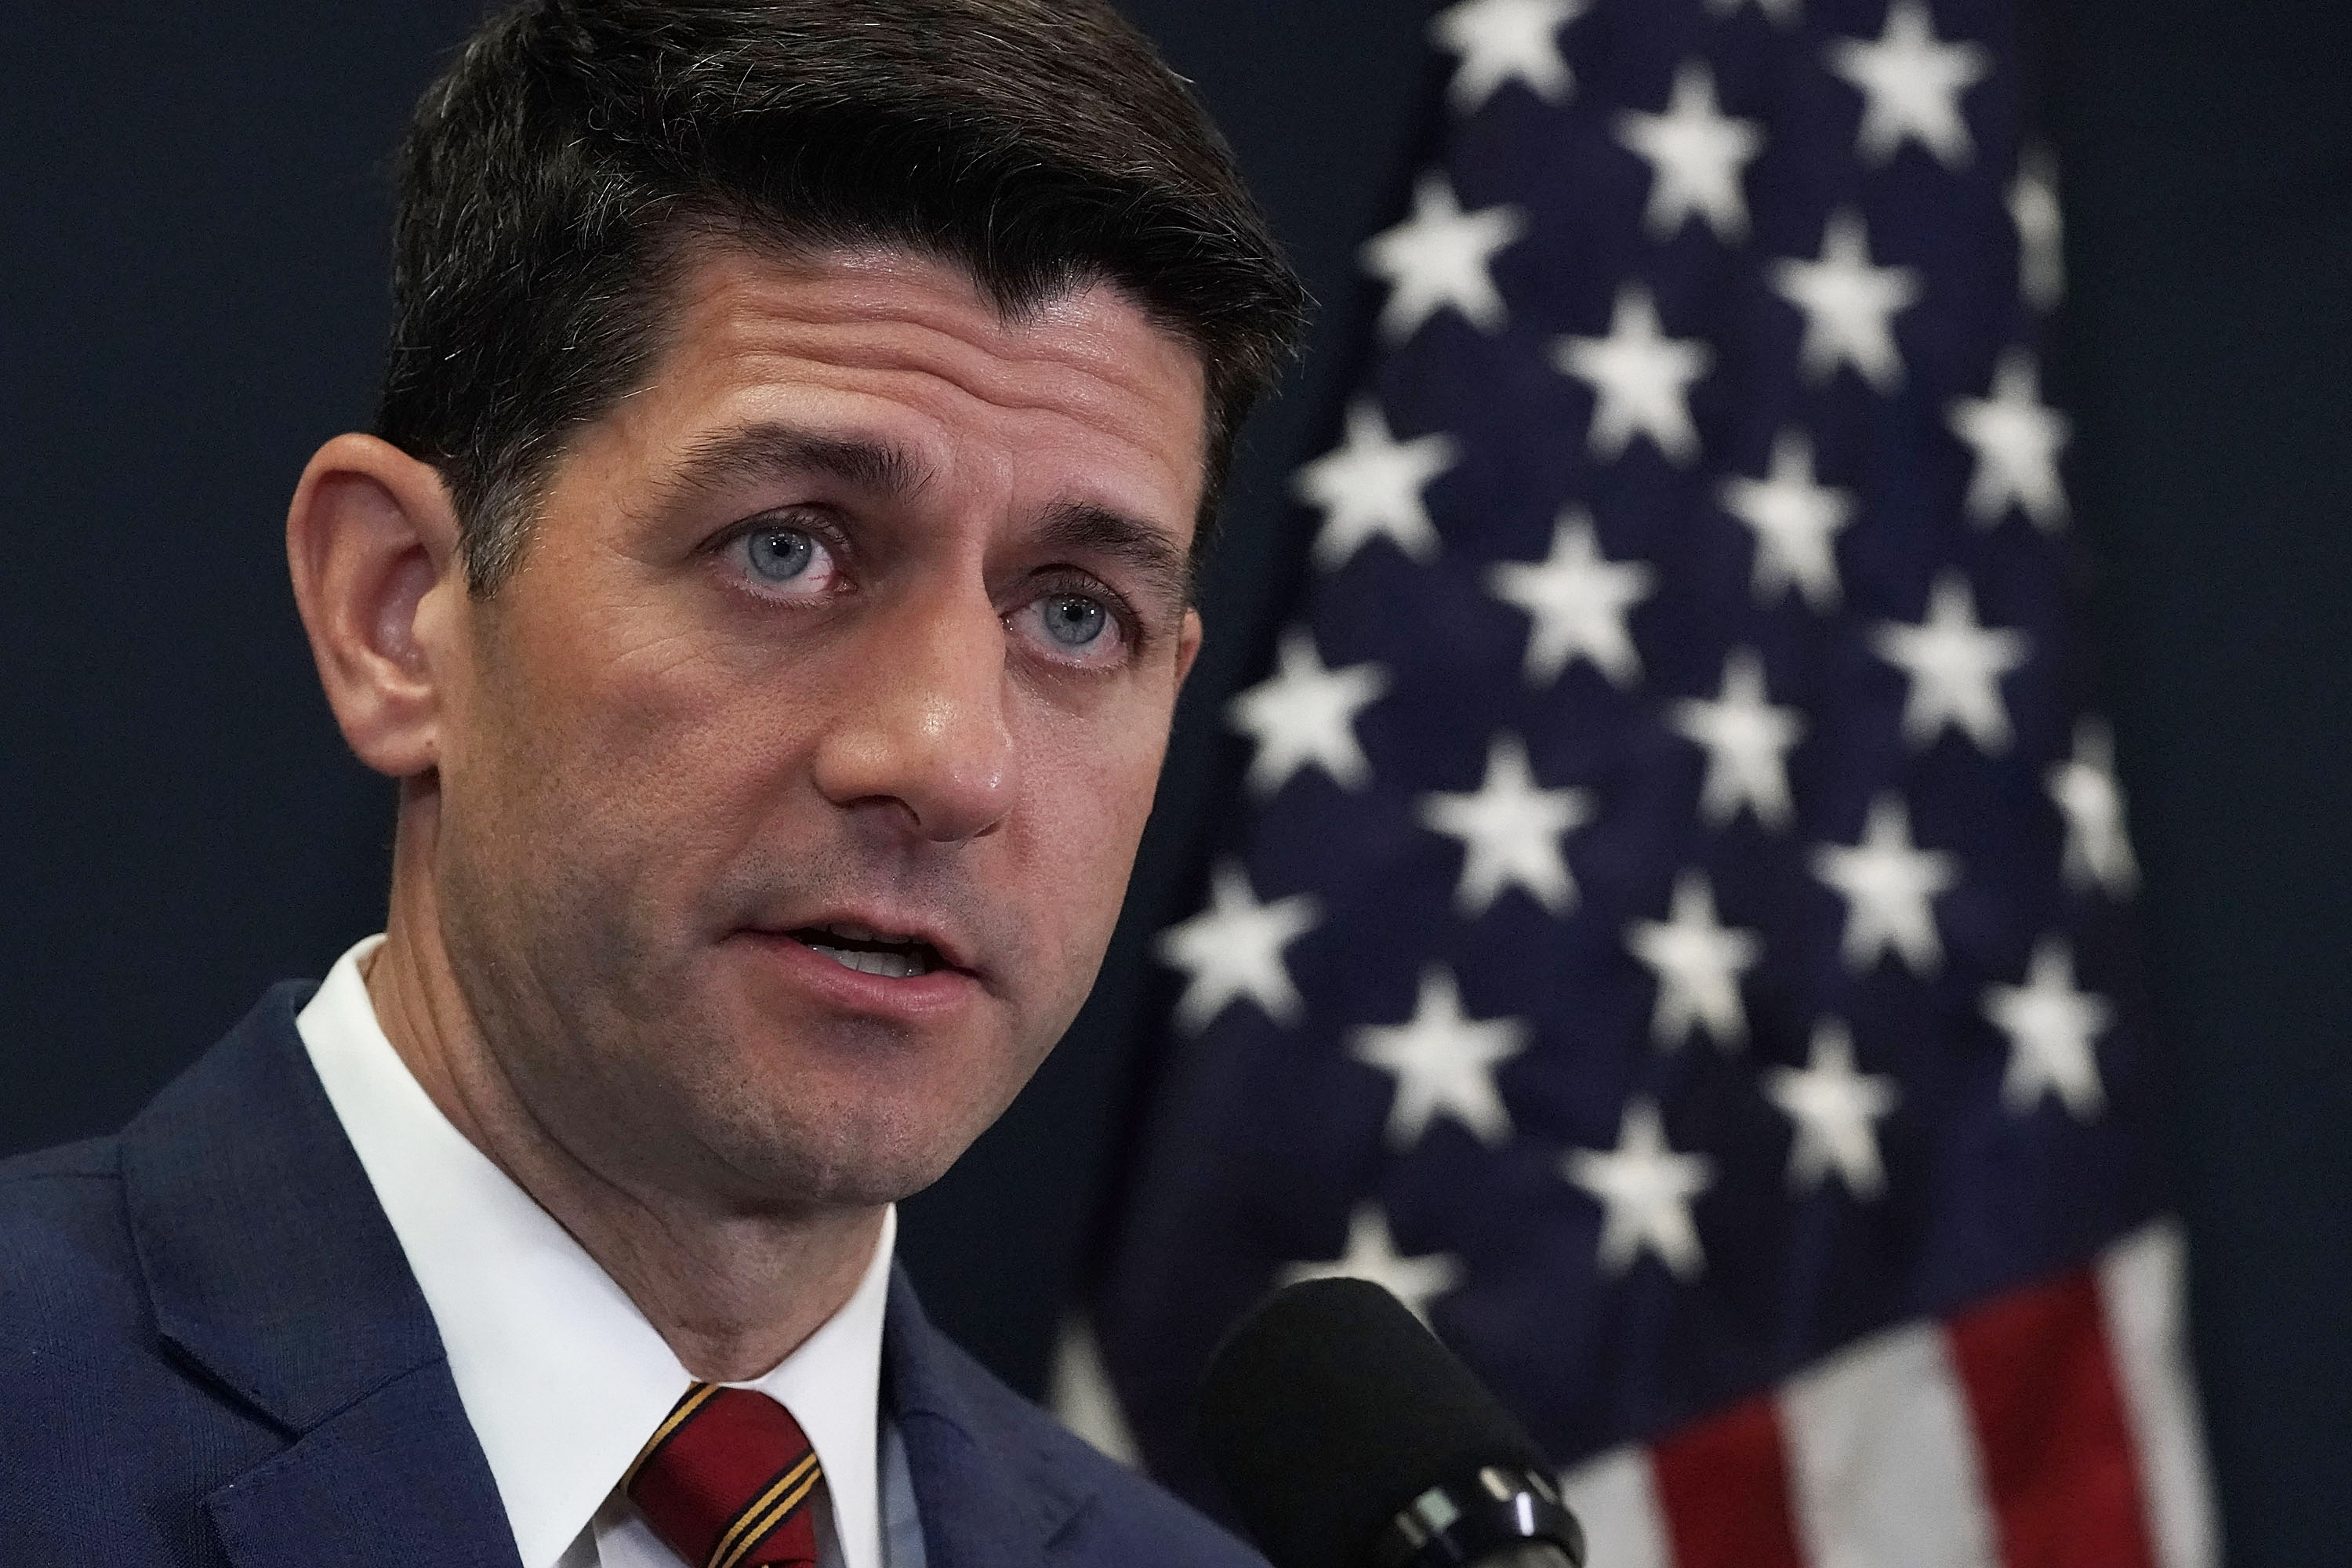 U.S. Speaker of the House Rep. Paul Ryan (R-WI) speaks during a news briefing after a House Republican Conference meeting May 22, 2018 on Capitol Hill in Washington, DC. (Alex Wong&mdash;Getty Images)